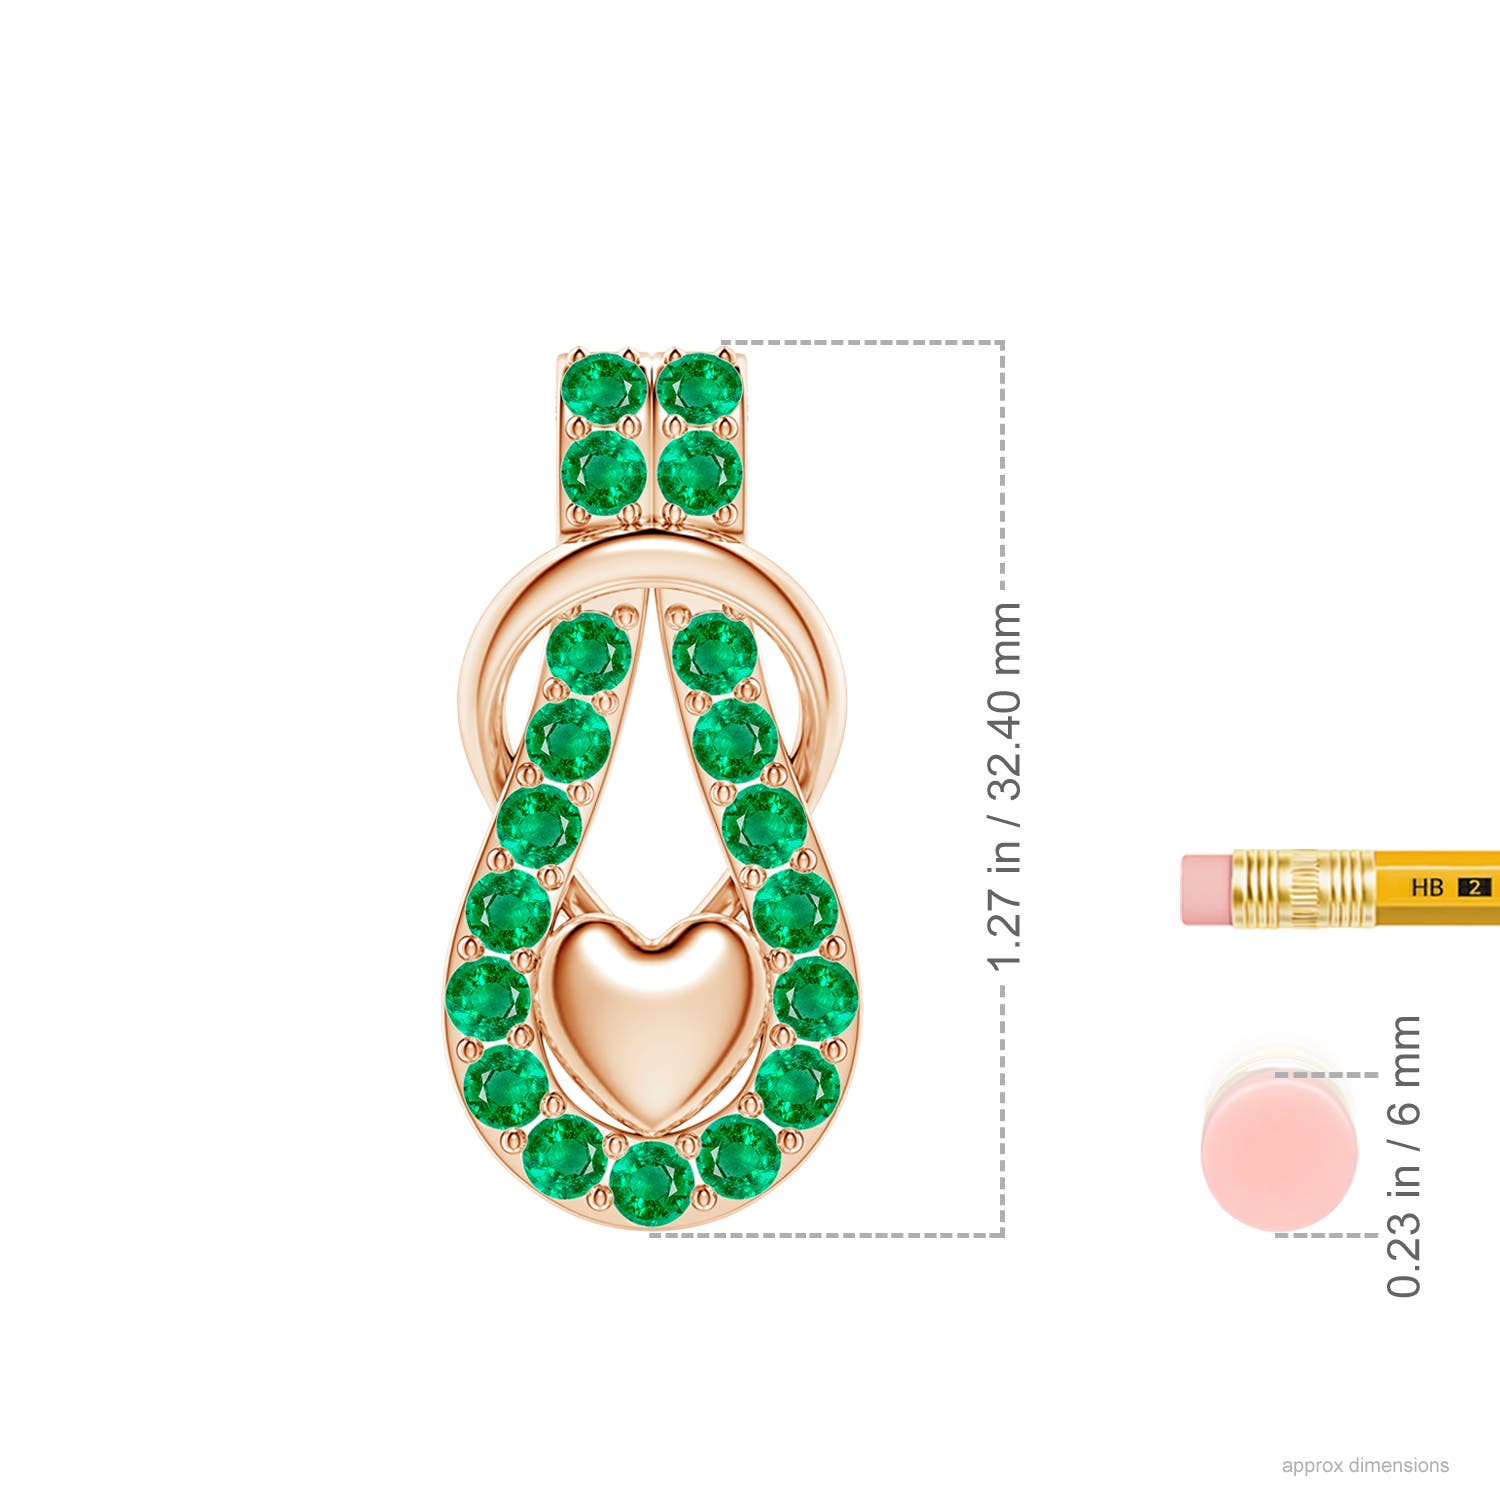 AAA - Emerald / 1.9 CT / 18 KT Rose Gold